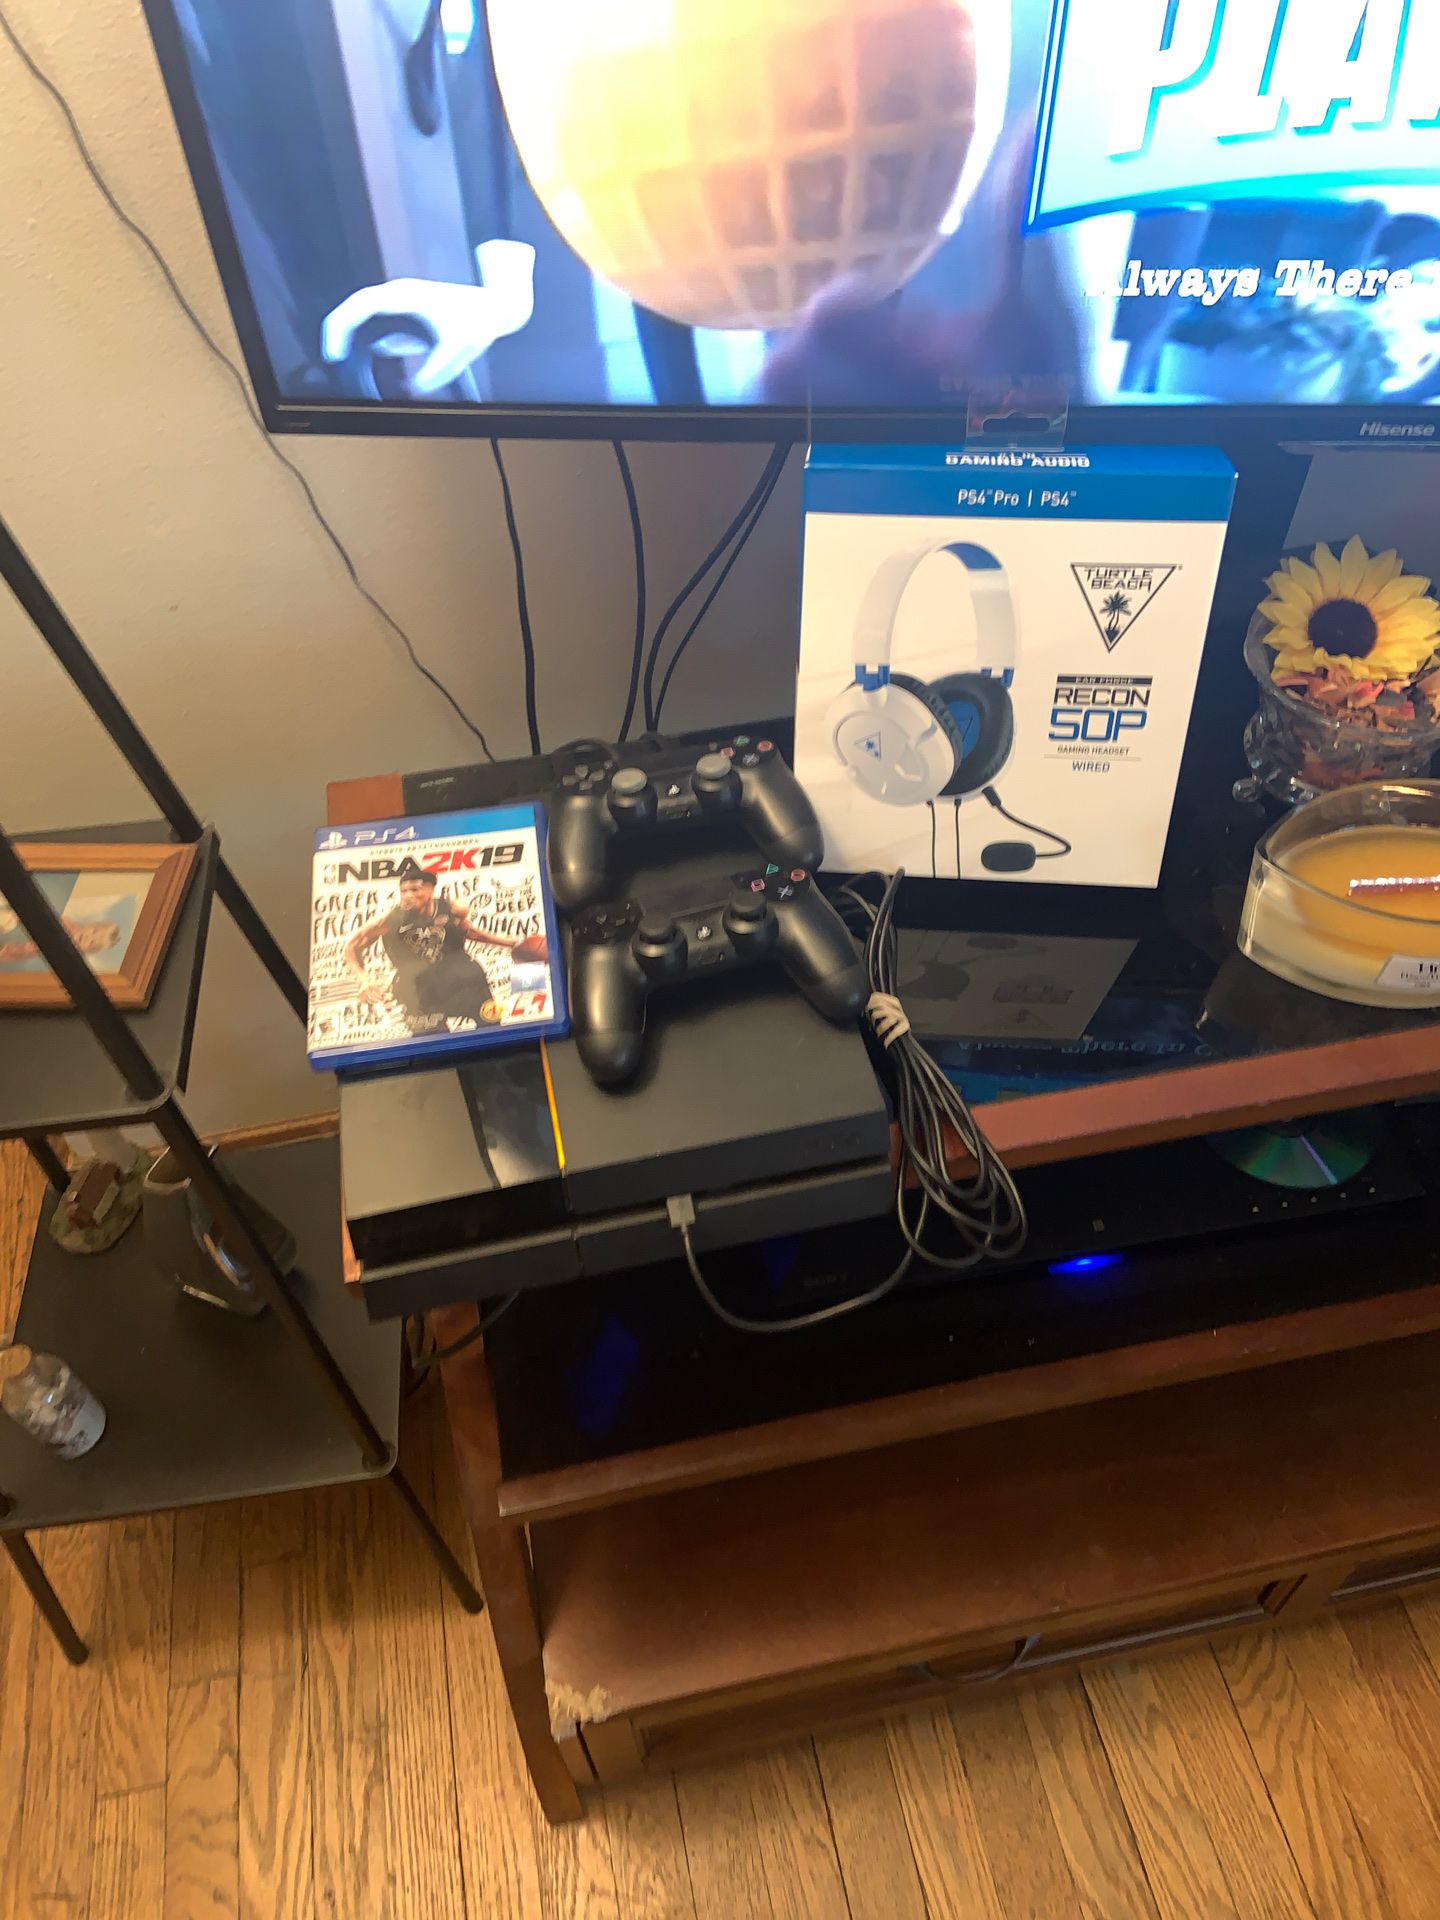 PS4 w/ 2 controllers